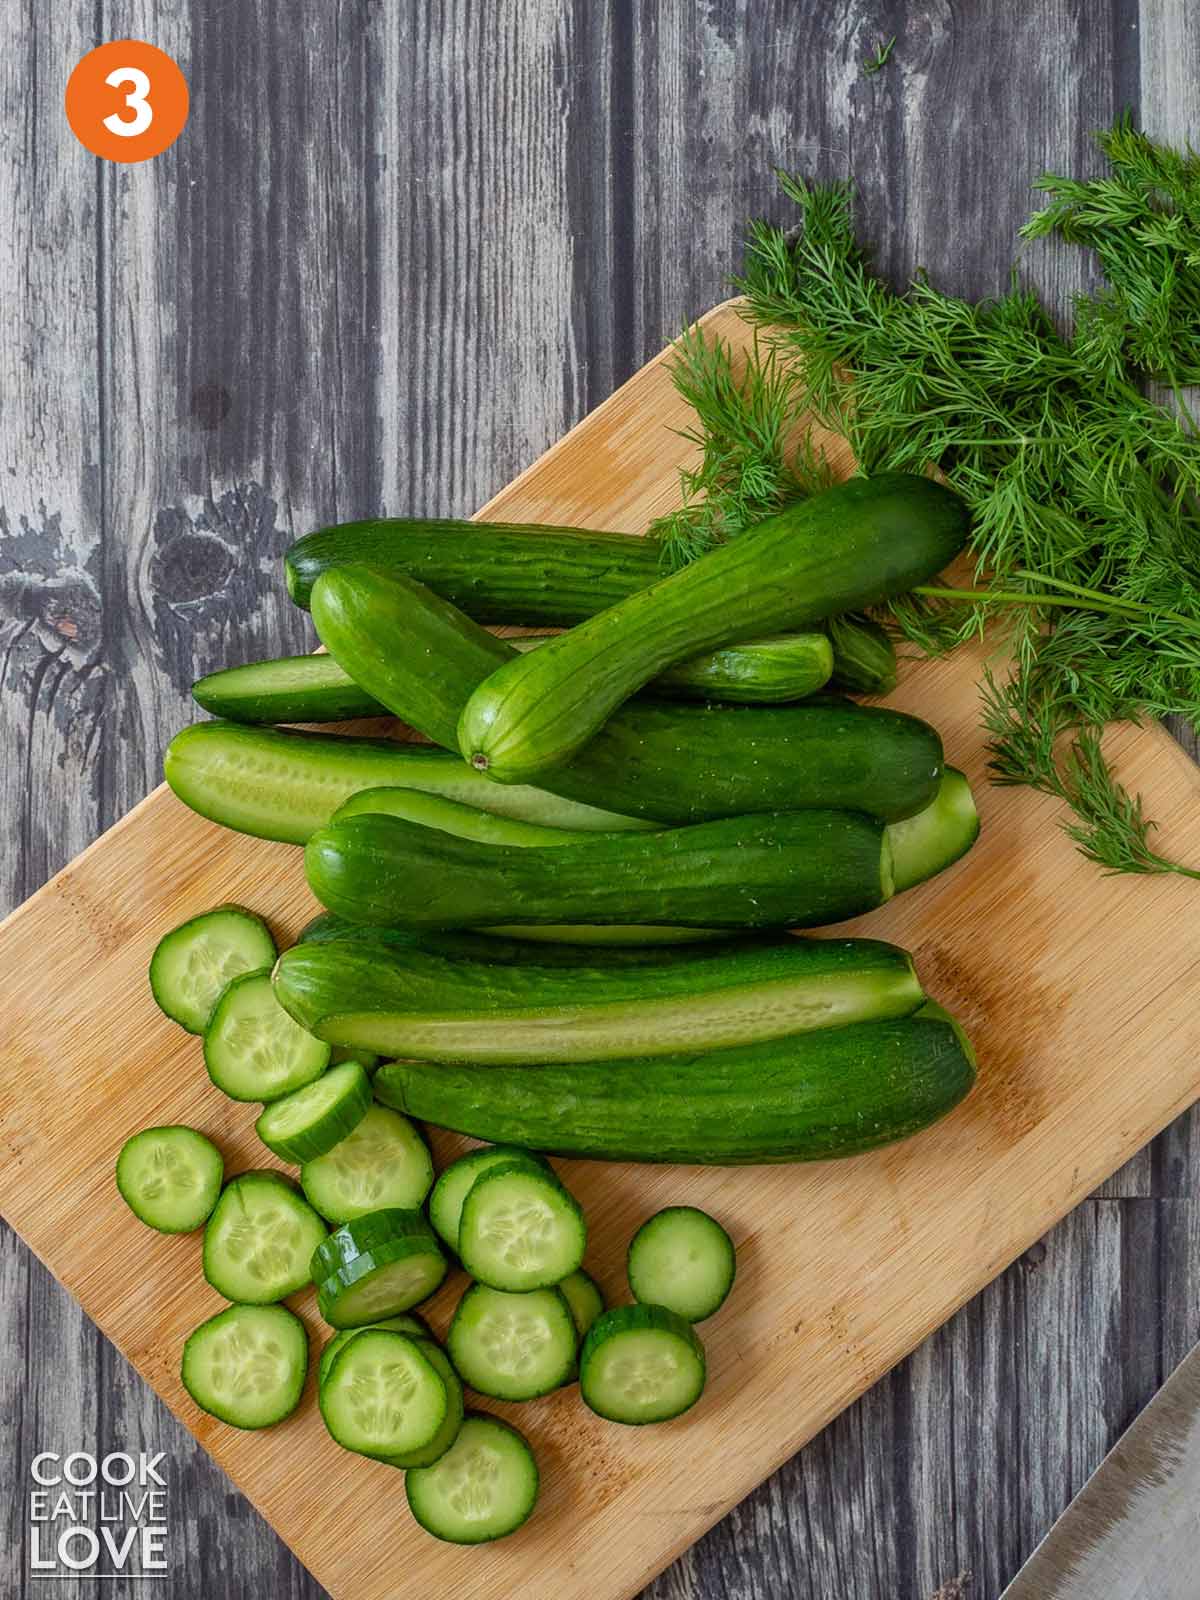 Cucumbers cut in half and in slices on a cutting board.